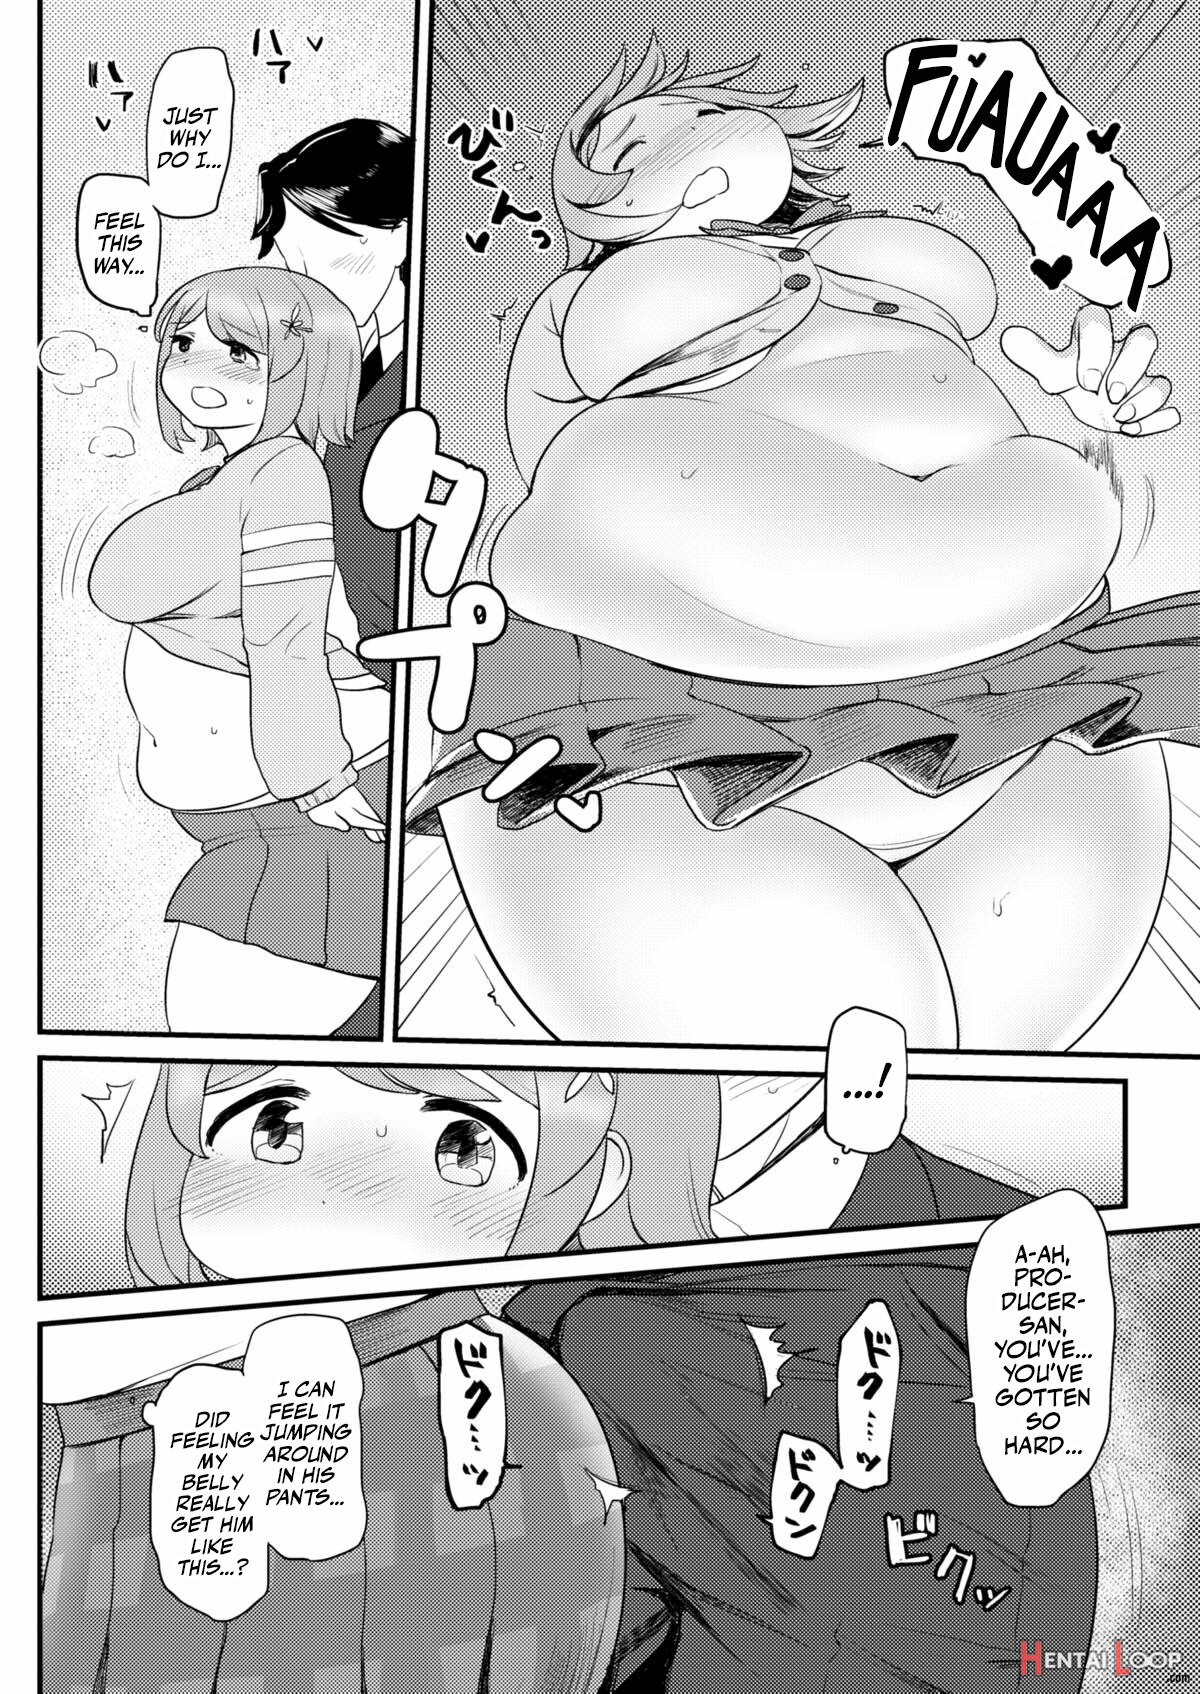 Kanako's Belly. page 7